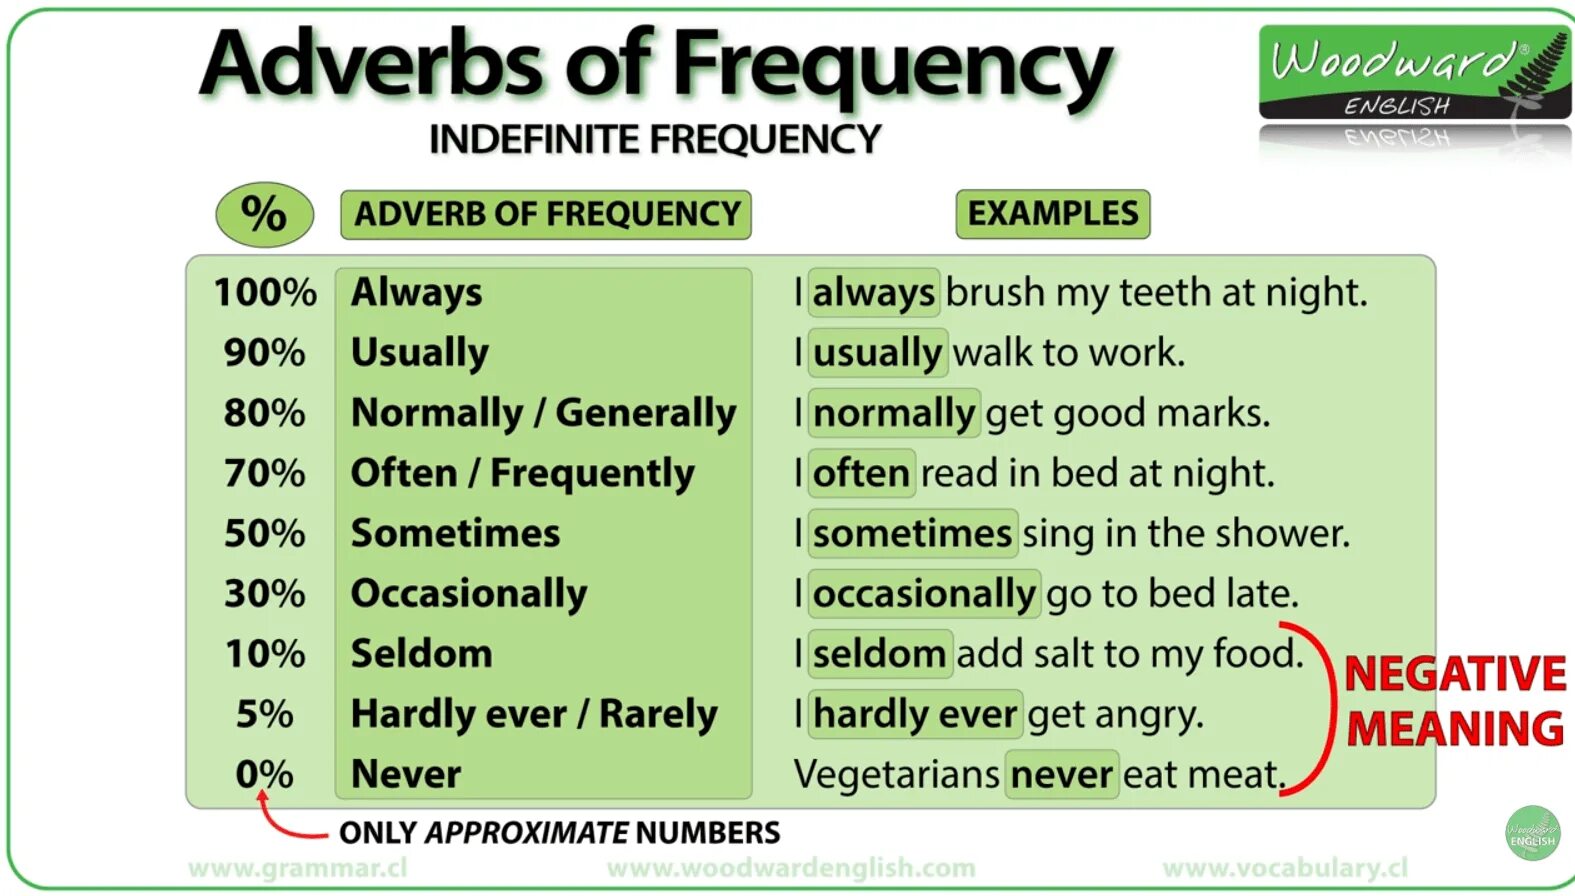 Often на английском. Adverbs of Frequency. Adverbs of Frequency in English. Adverbs and expressions of Frequency правило. Frequency adverbs грамматика.